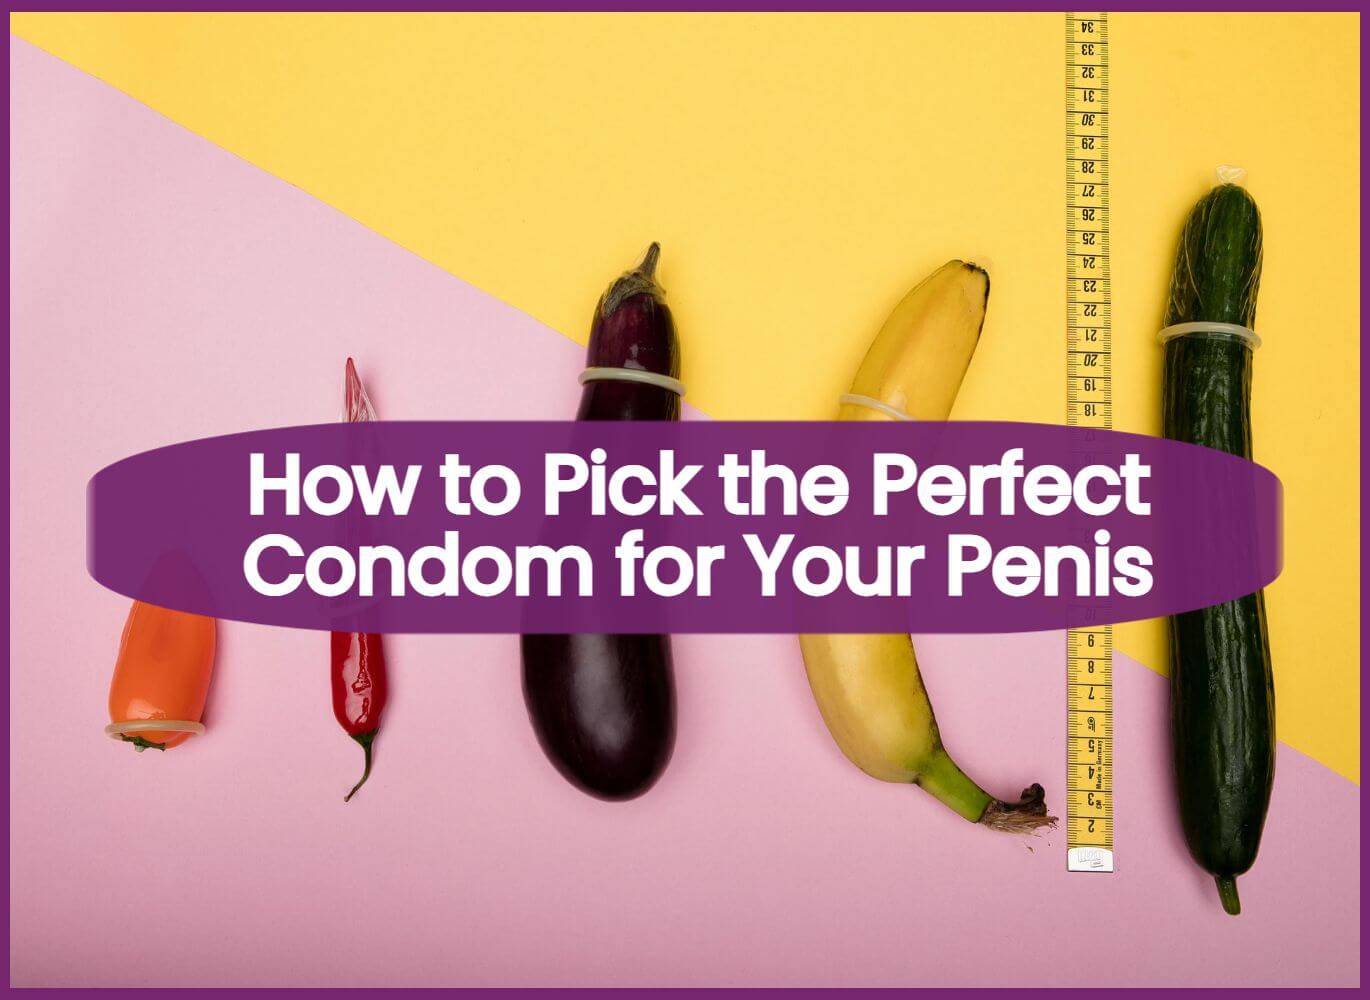 How to Pick the Perfect Condom for Your Penis